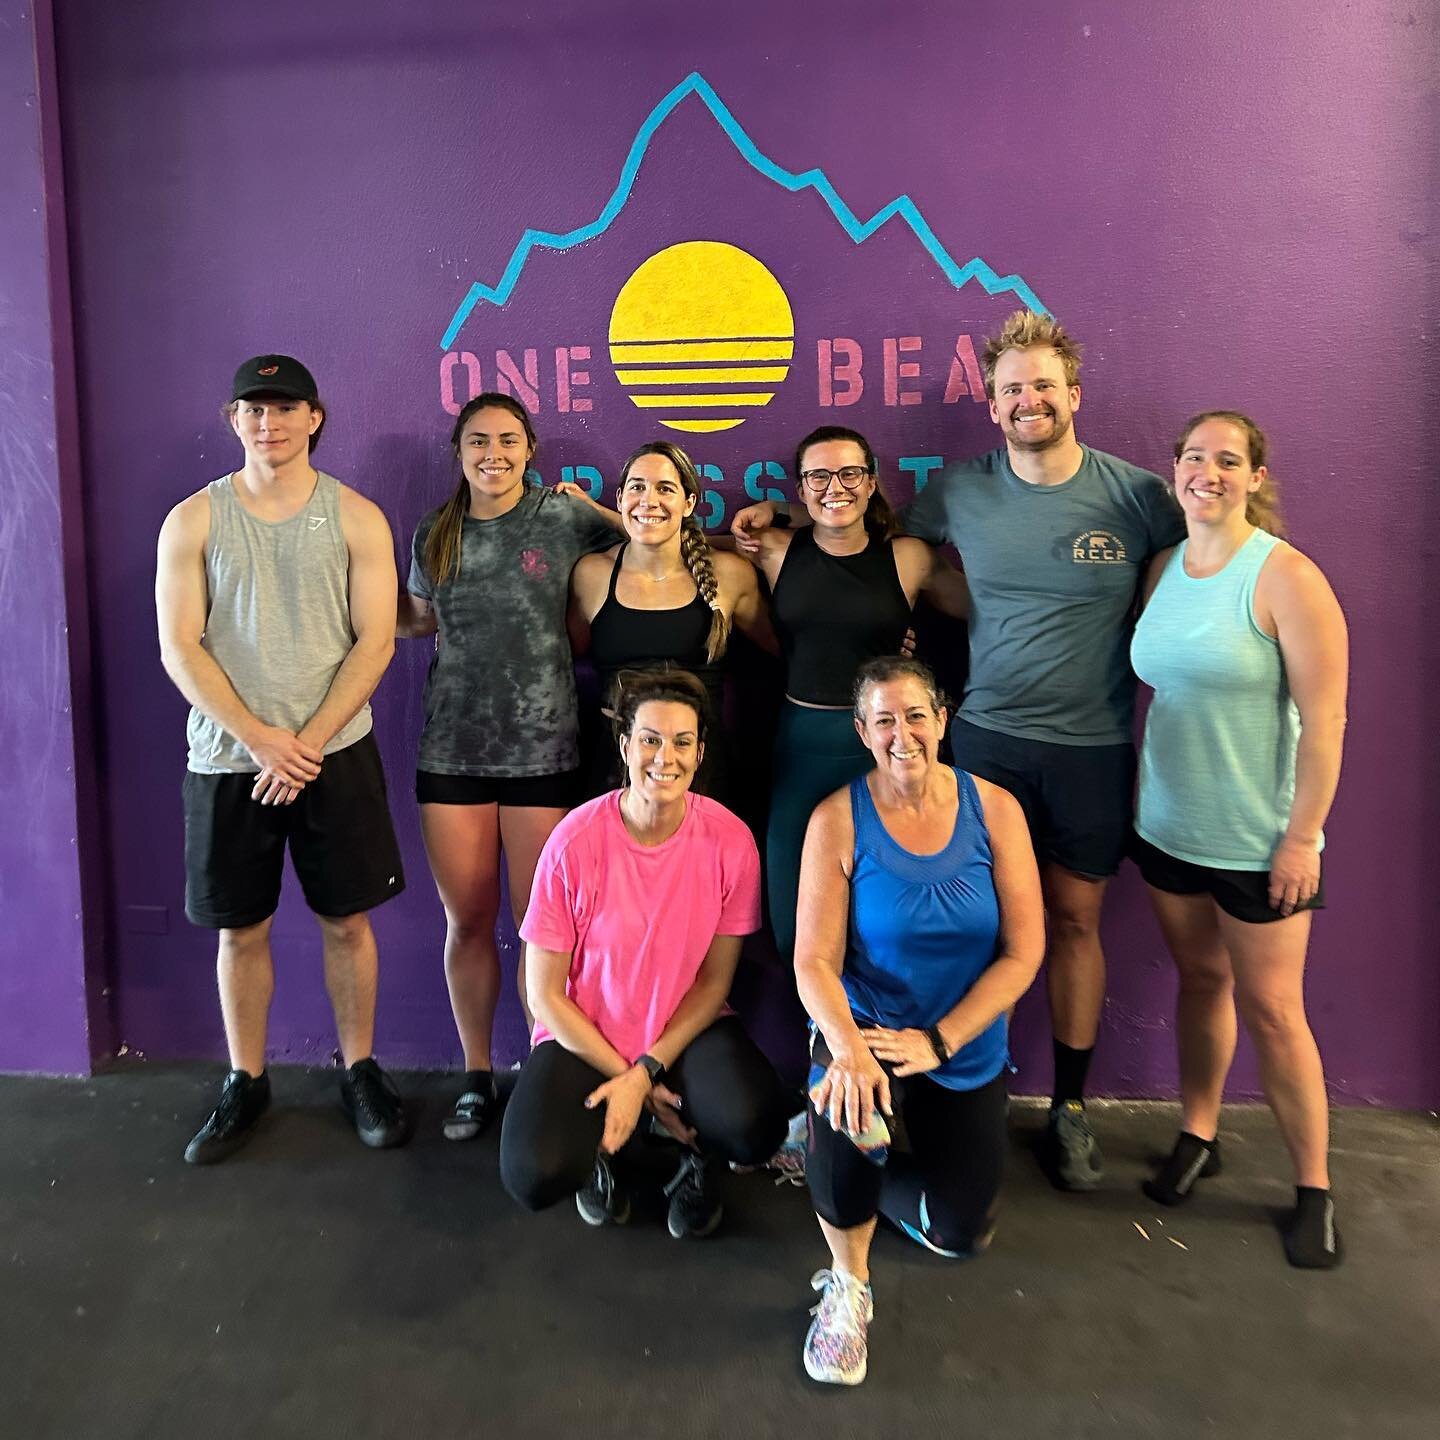 Another fun Saturday in the books!!💪🏼 Come join us!! 

#weareonebeat #onebeatcrossfit #onebeat #fitfam #humblehappydriven #saturday #saturdayvibes #workout #saturdayworkout #fitnessismorefunwithfriends